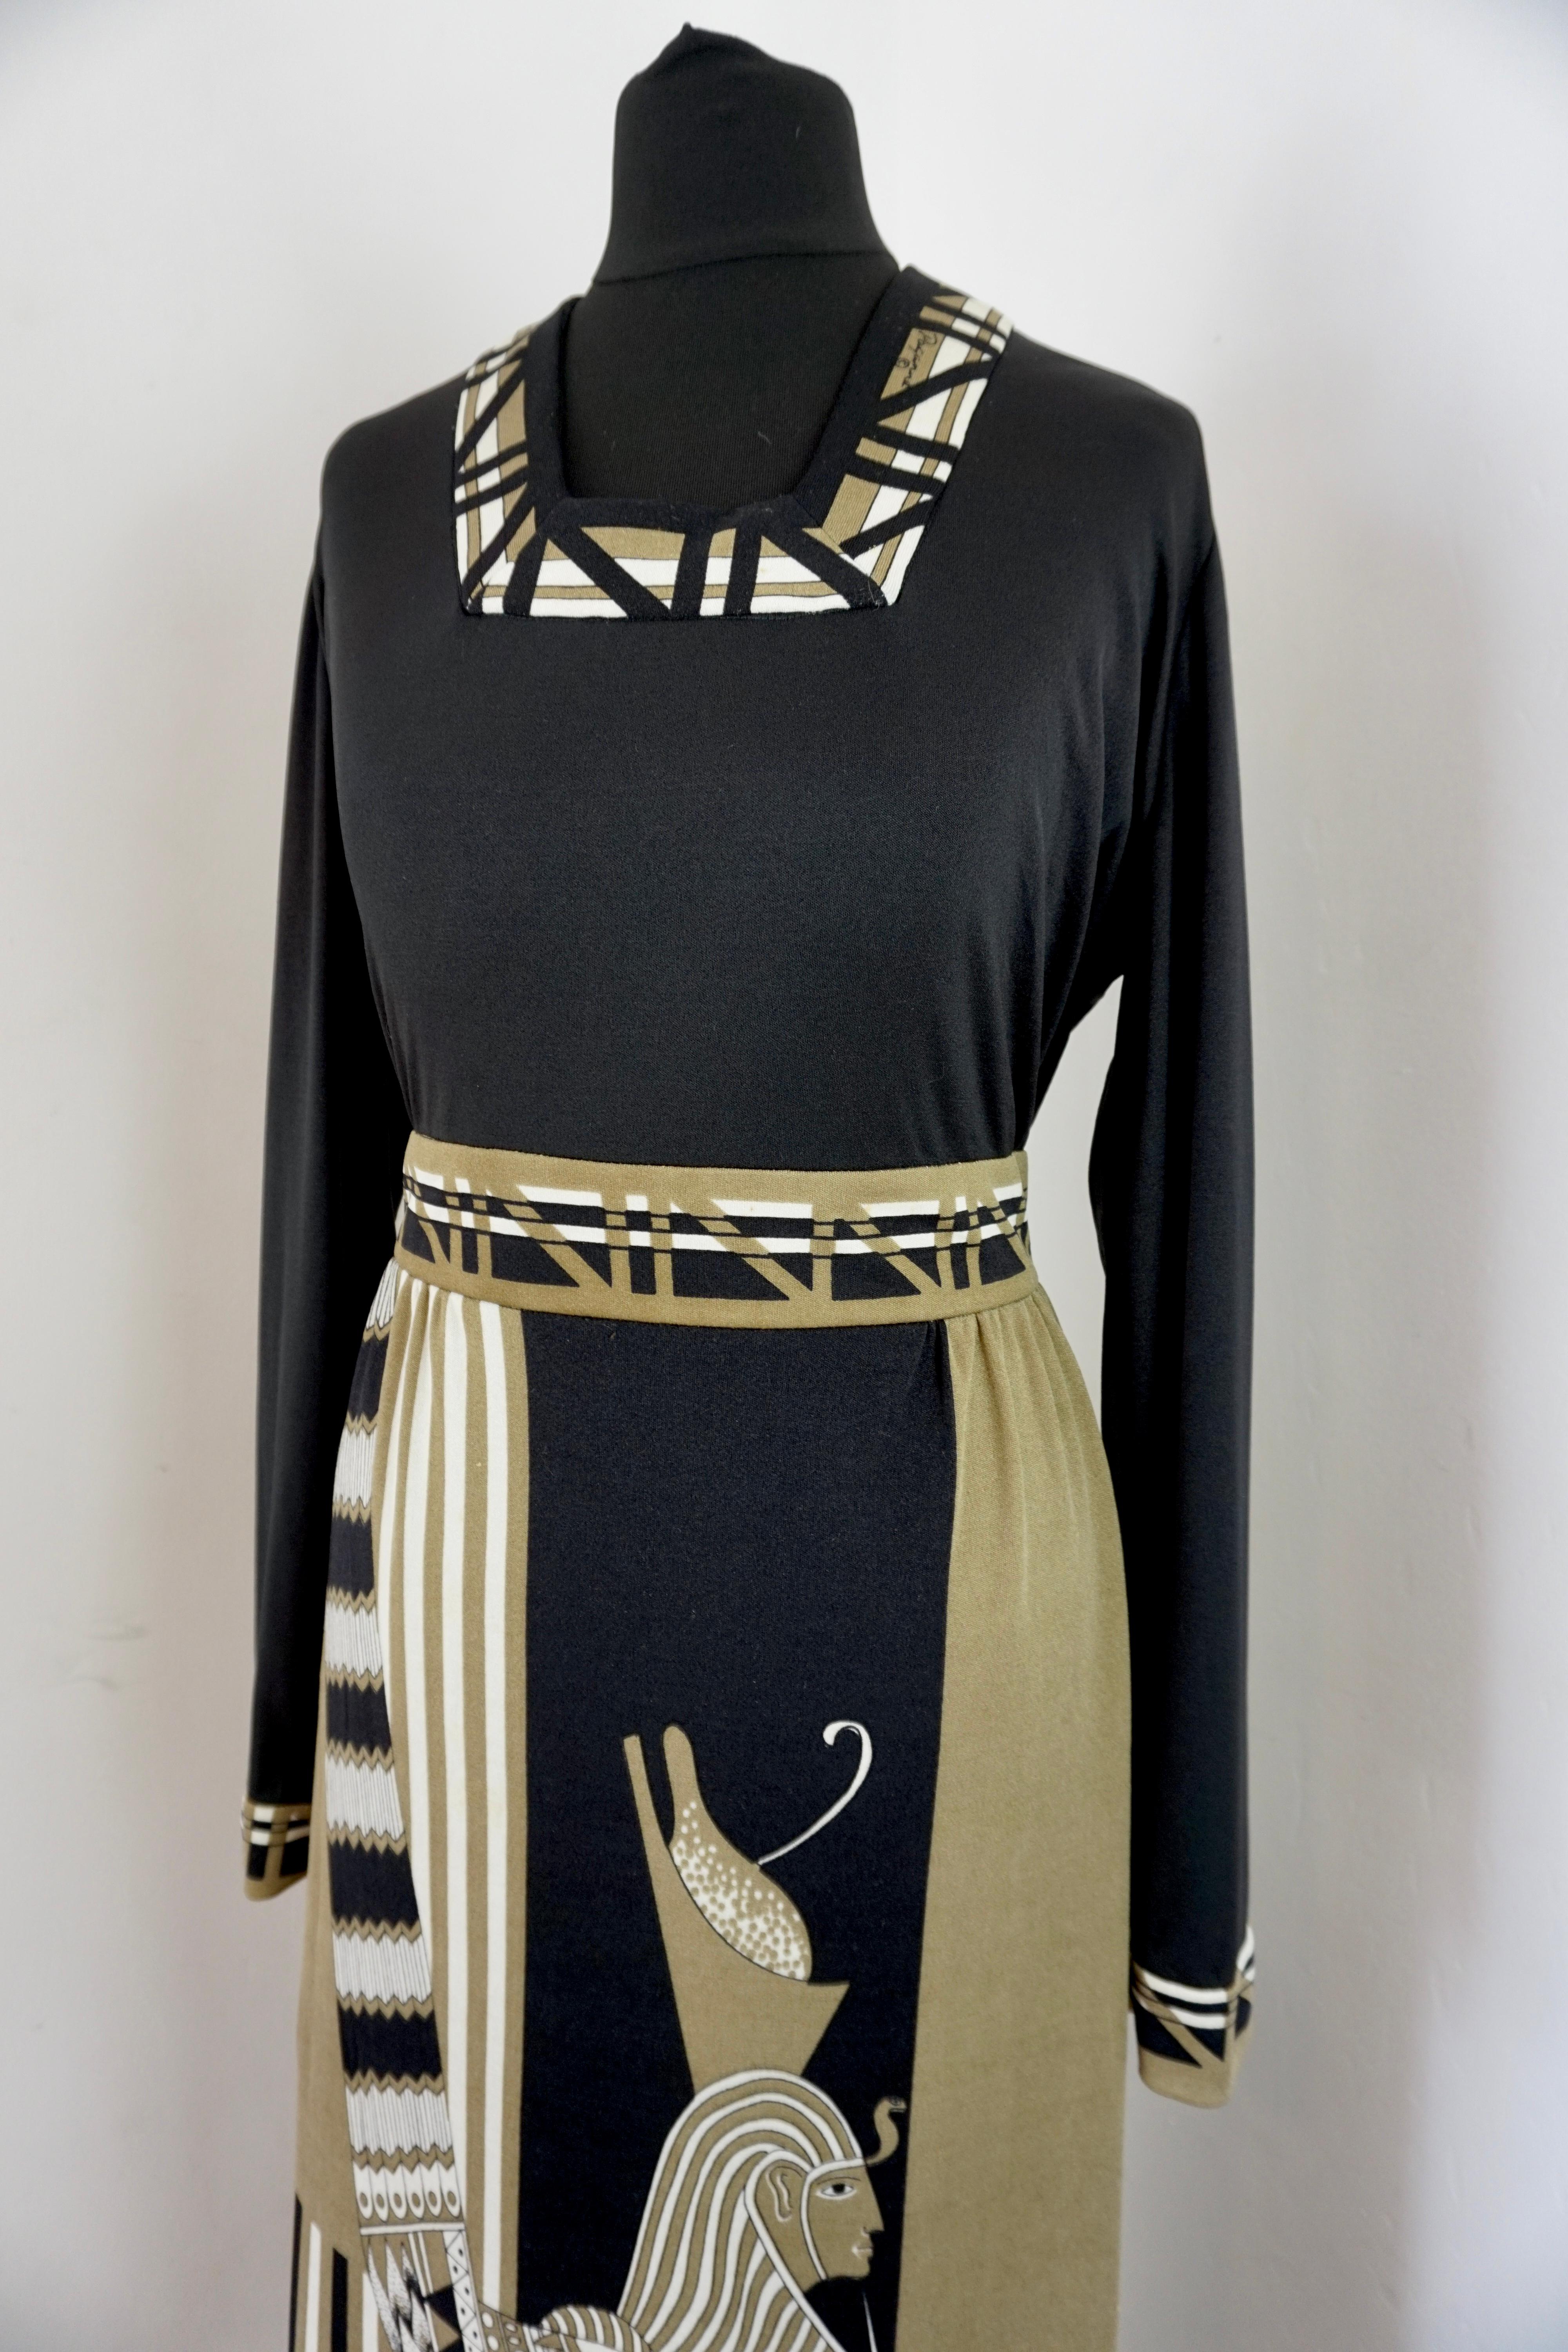 Incredible 1970s signed Paganne by Gene Berk in the famous Egyptian design. Made from the classic silk jersey combining a khaki green in a monochrome design.
Labelled a size 16